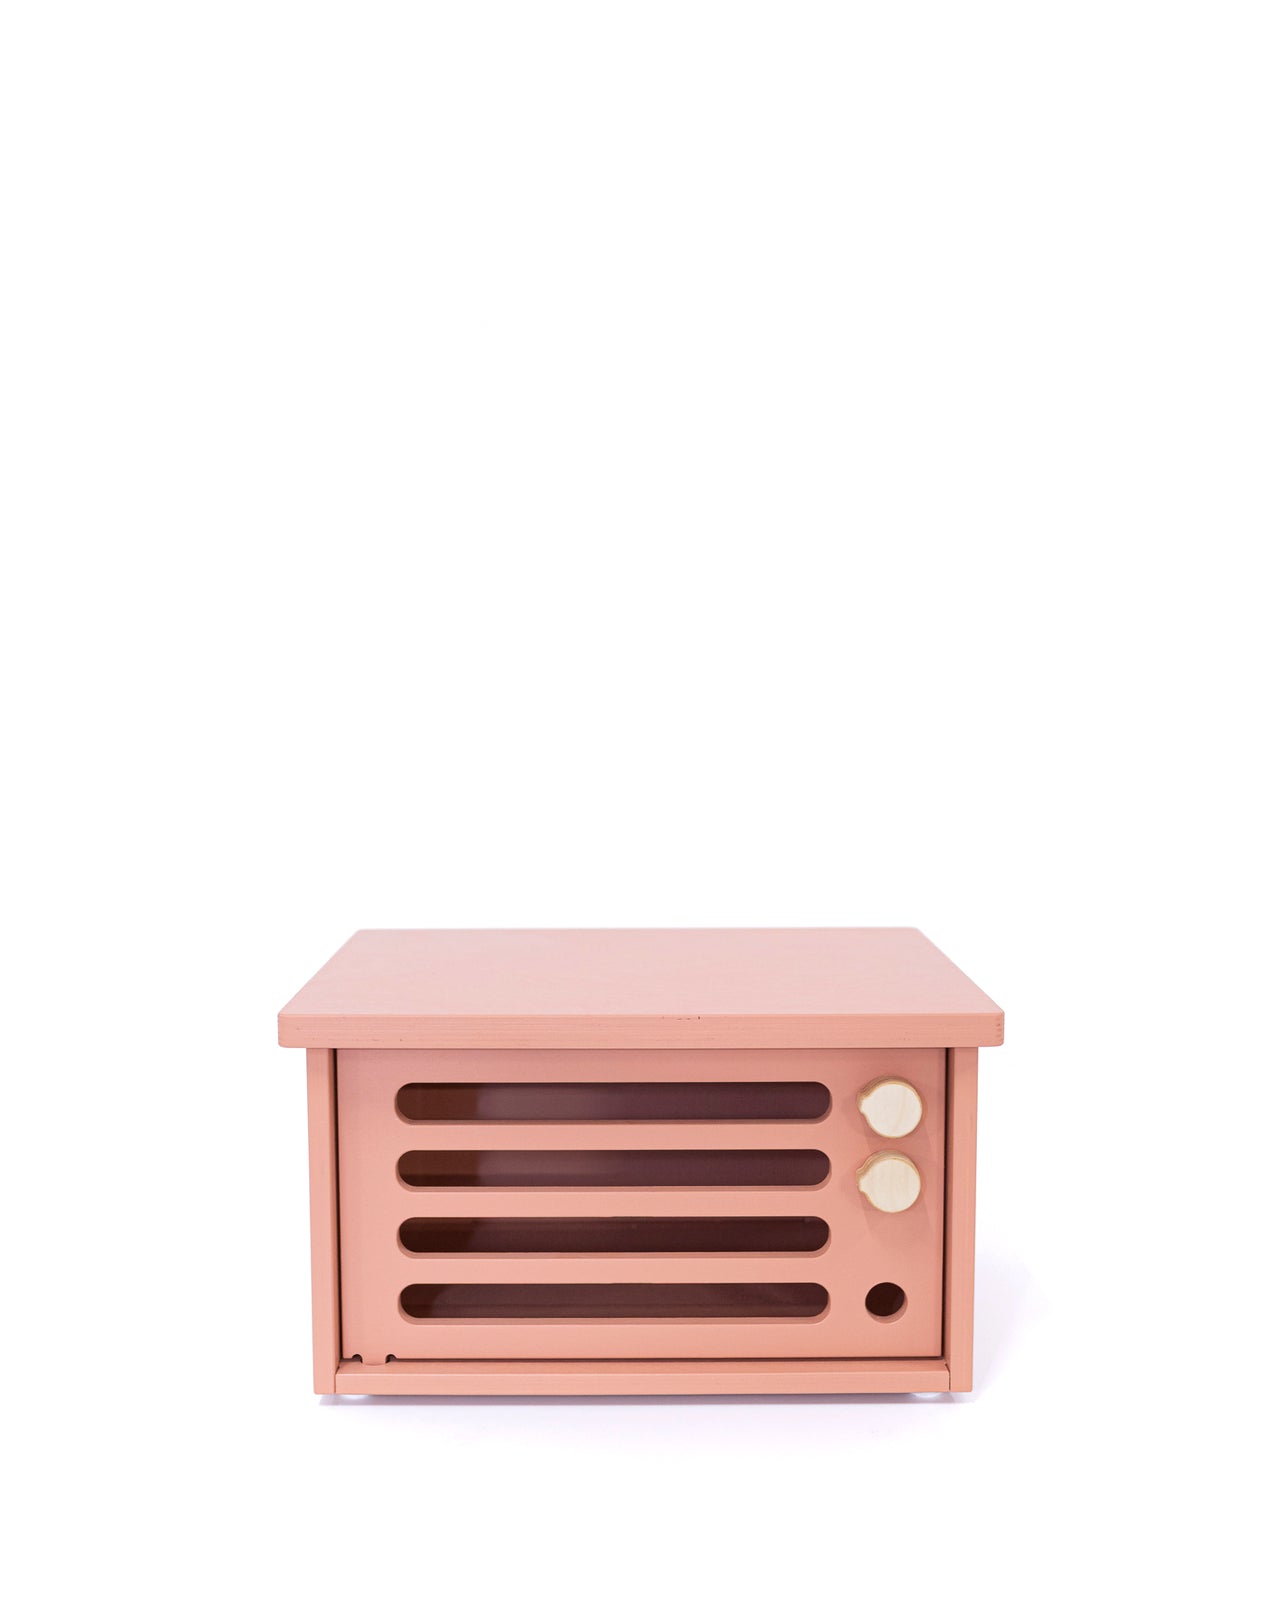 Play Oven - Dusty Pink - MIDMINI - Handcrafted wooden toys for generations.